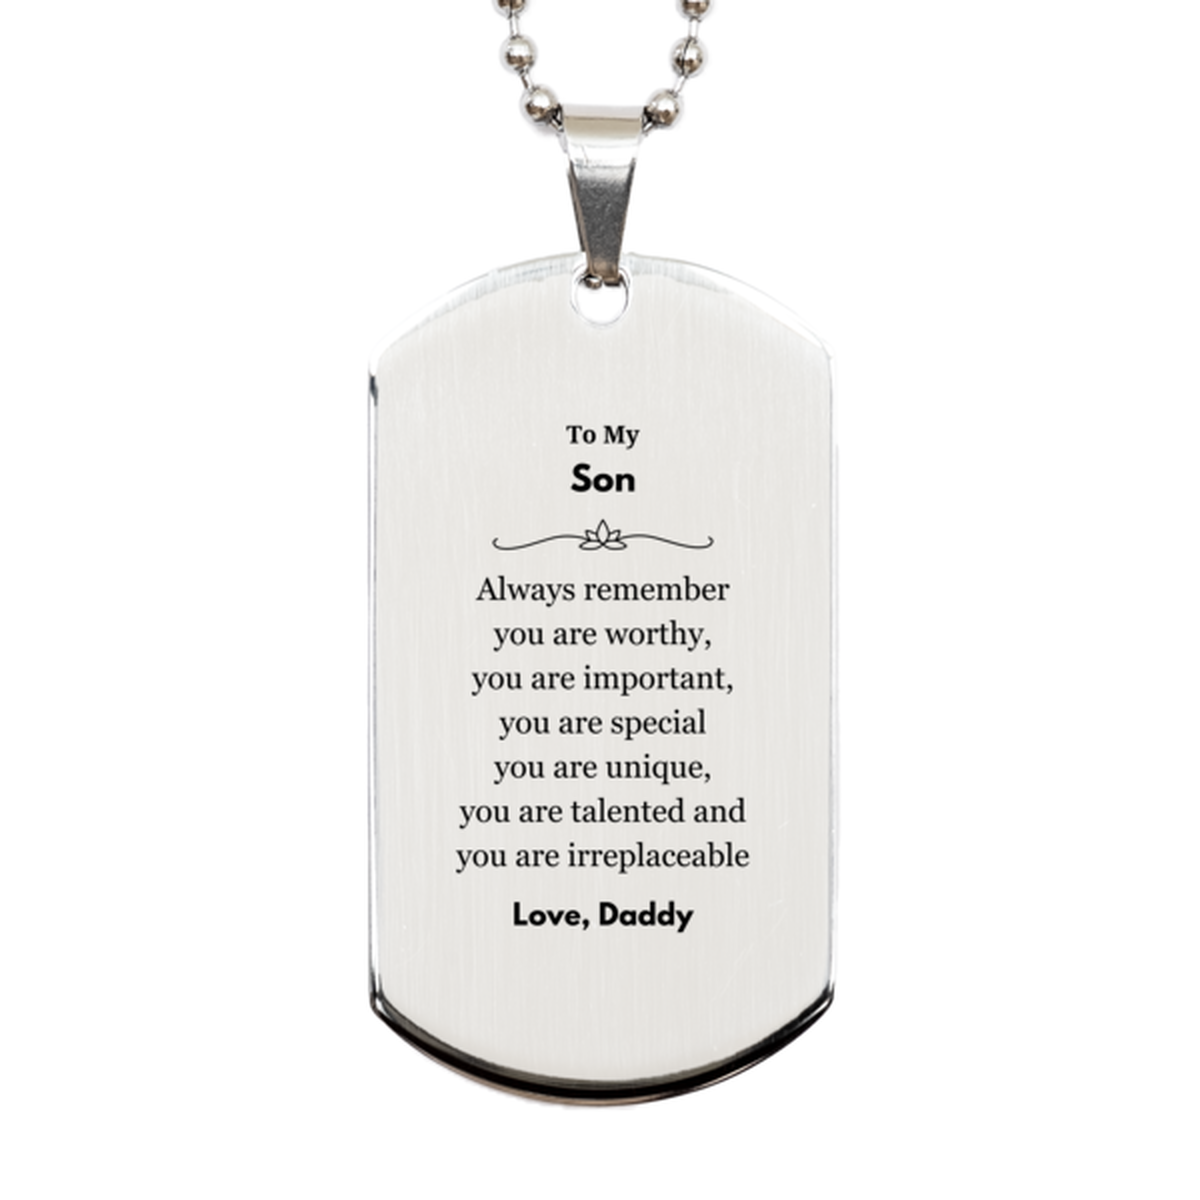 Son Birthday Gifts from Daddy, Inspirational Silver Dog Tag for Son Christmas Graduation Gifts for Son Always remember you are worthy, you are important. Love, Daddy